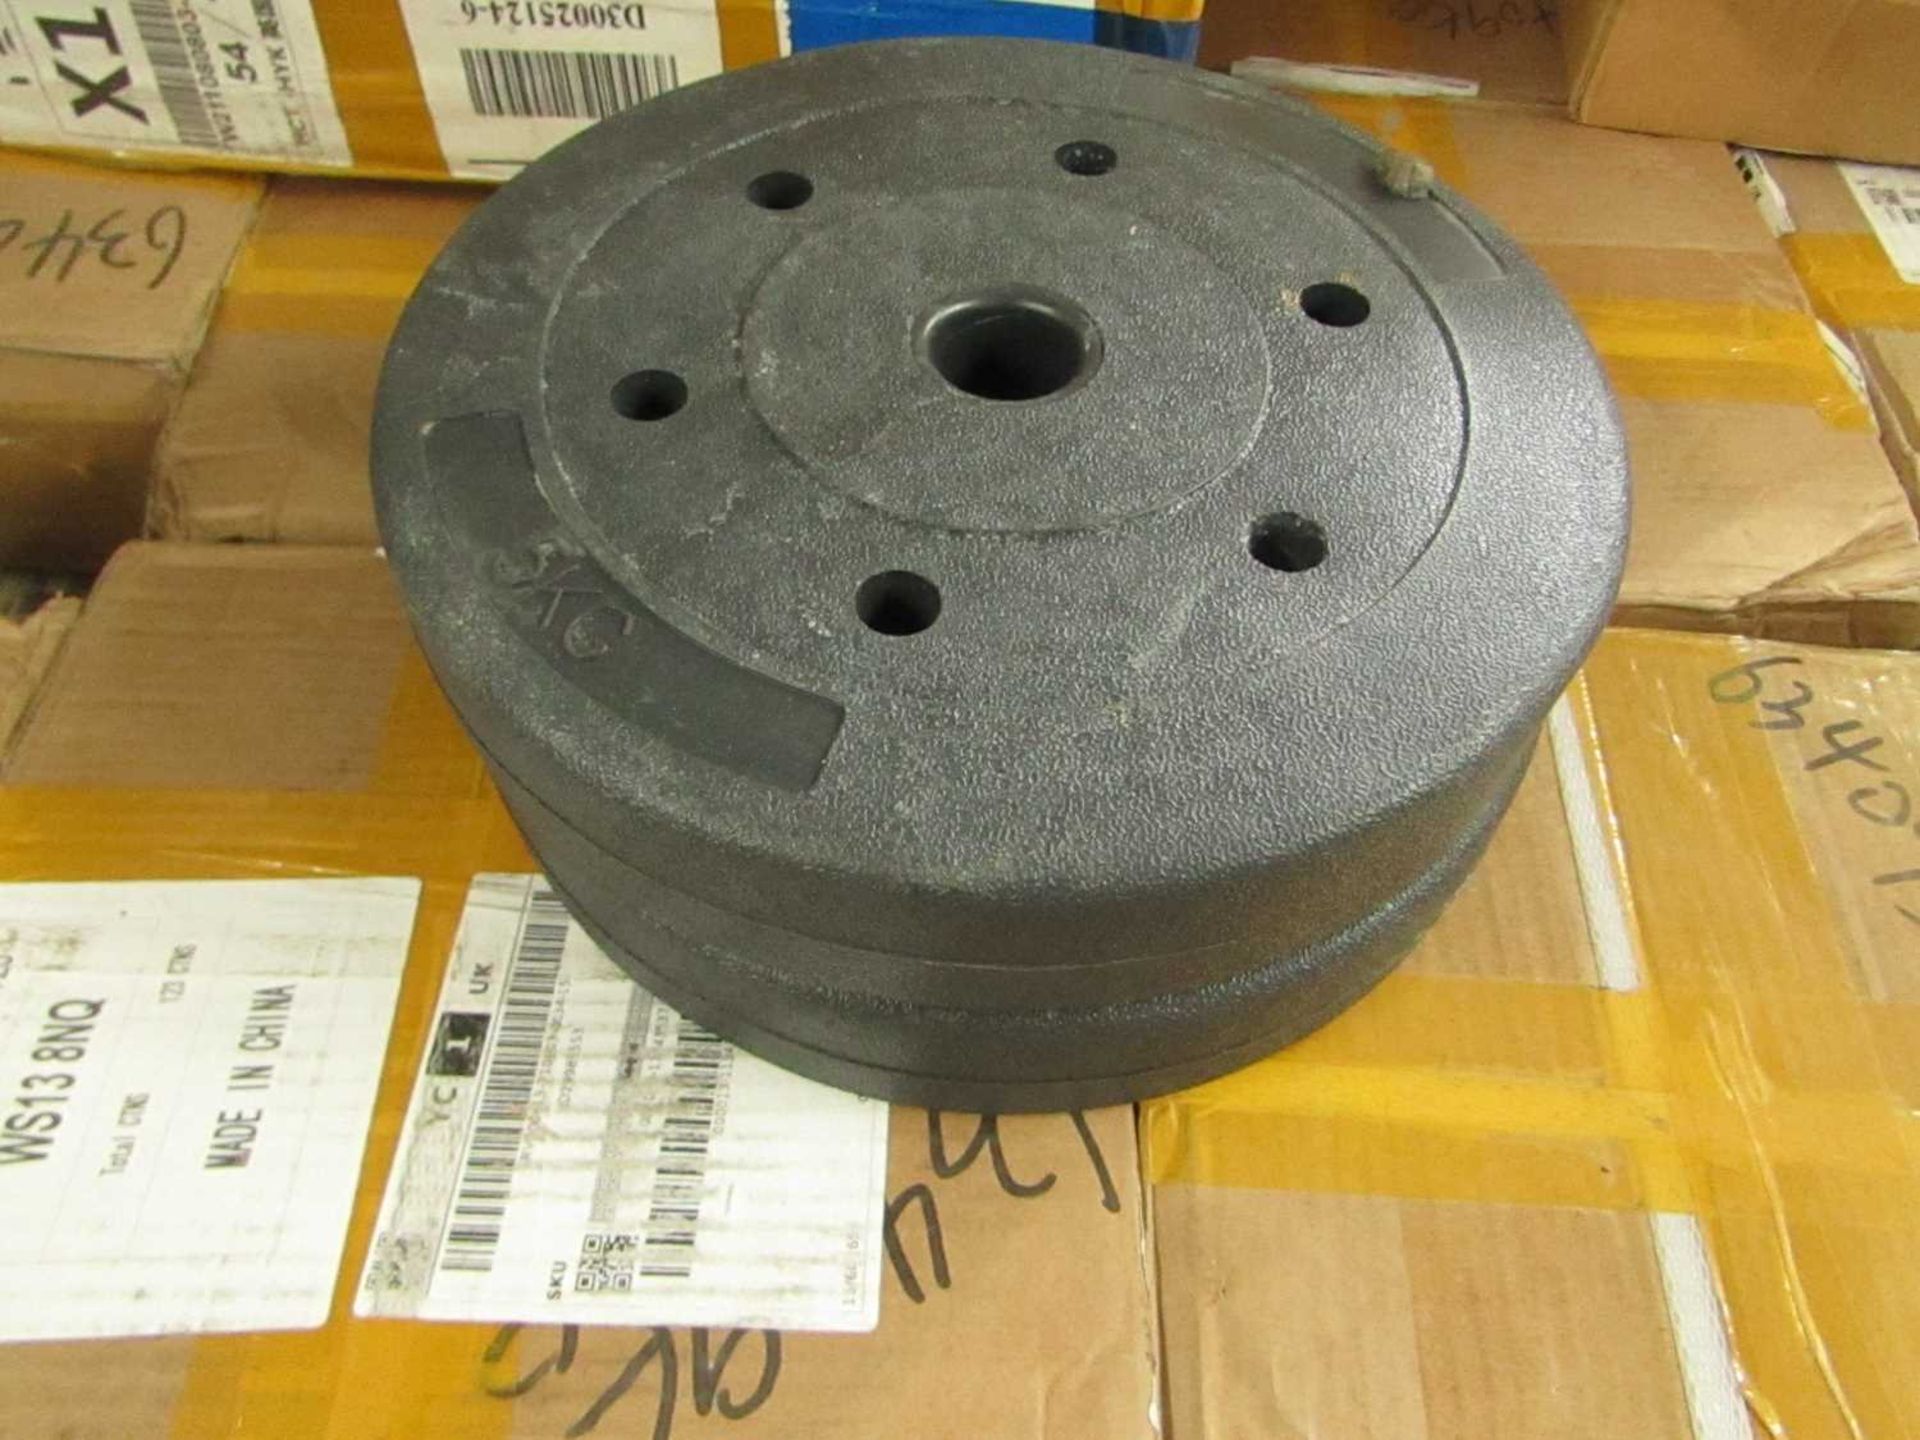 VAT 2x Set Of 2 5KG Weights - No Handles Or Accessories Present - New & Boxed.